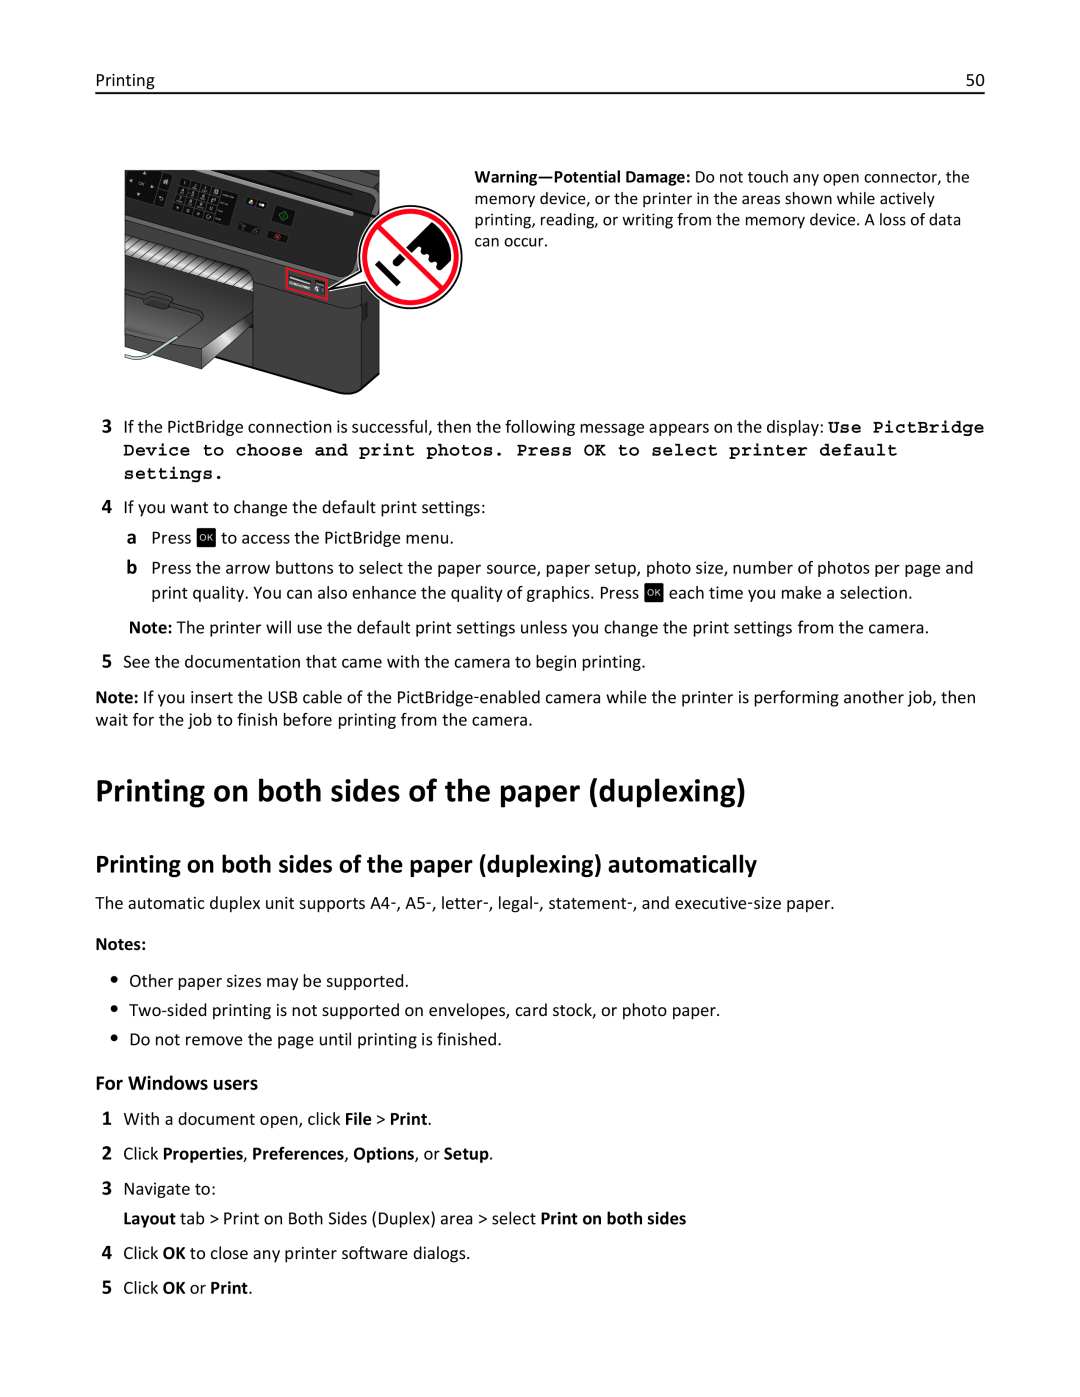 Lexmark 90P3000, PRO4000C manual Printing on both sides of the paper duplexing automatically, For Windows users 